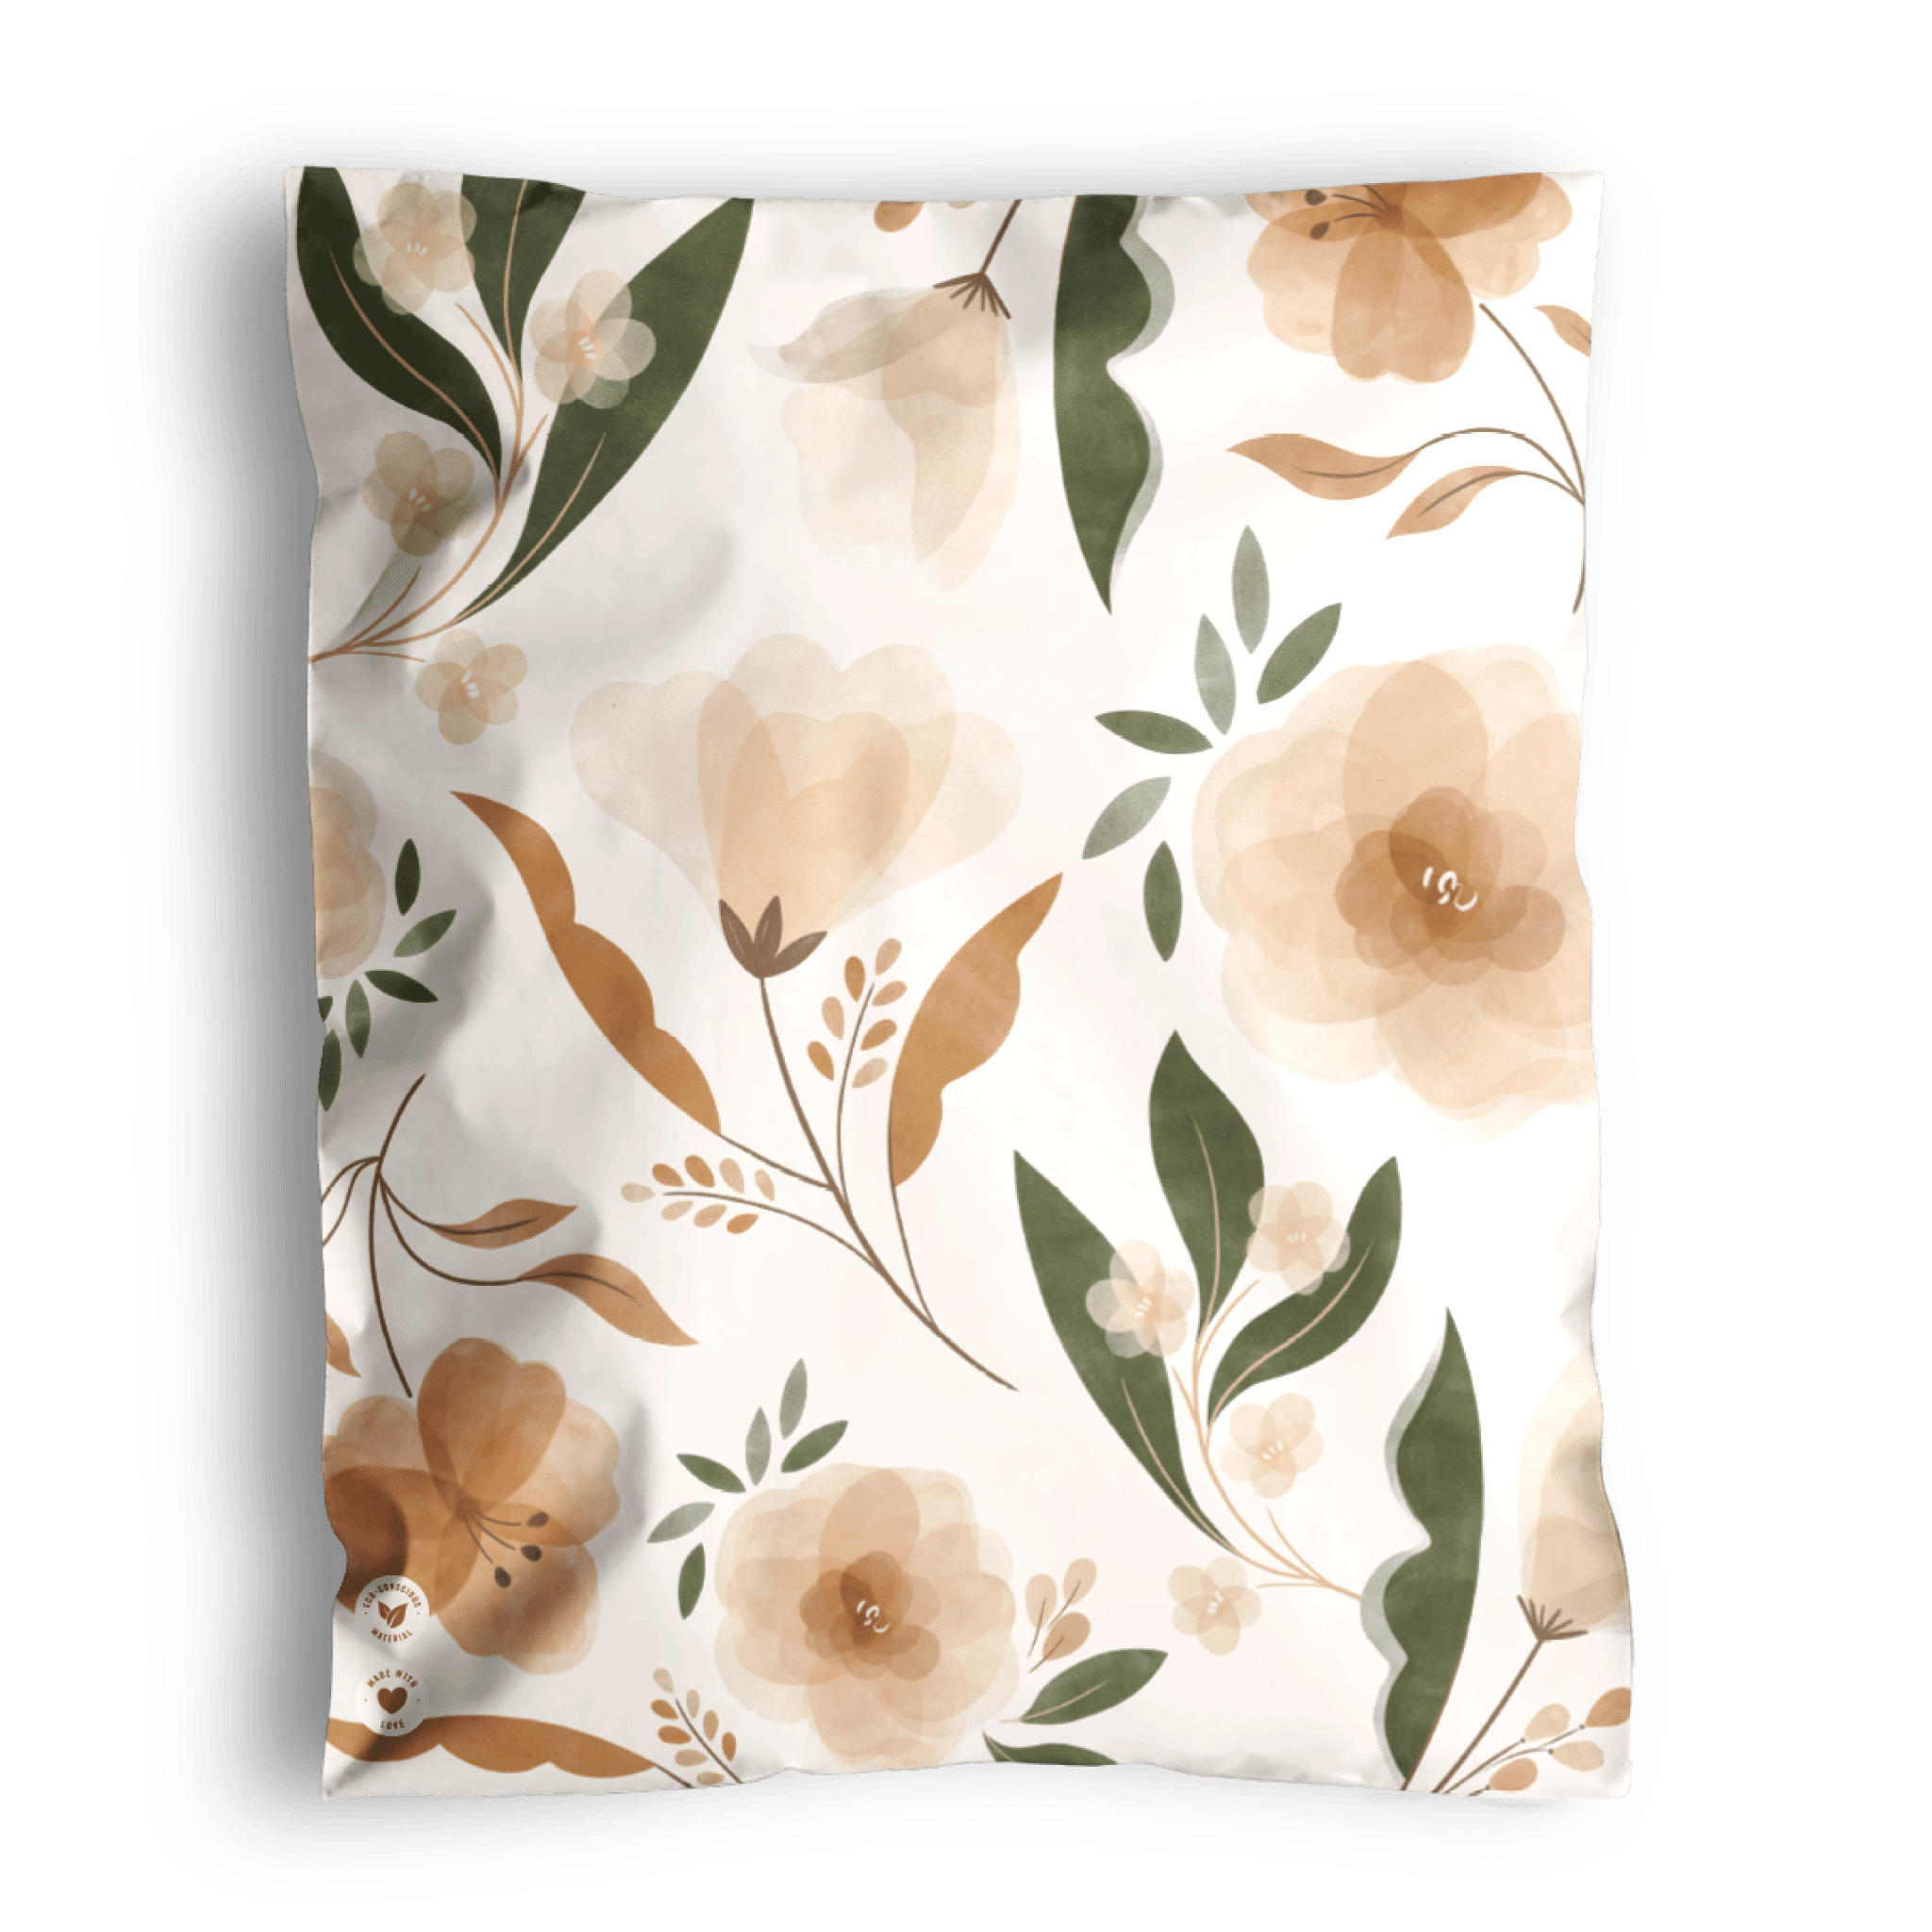 A floral patterned scarf with beige, green, and brown tones, displayed on a transparent background and packaged in Camelia Bloom Biodegradable Mailers 14.5" x 19" from impack.co.